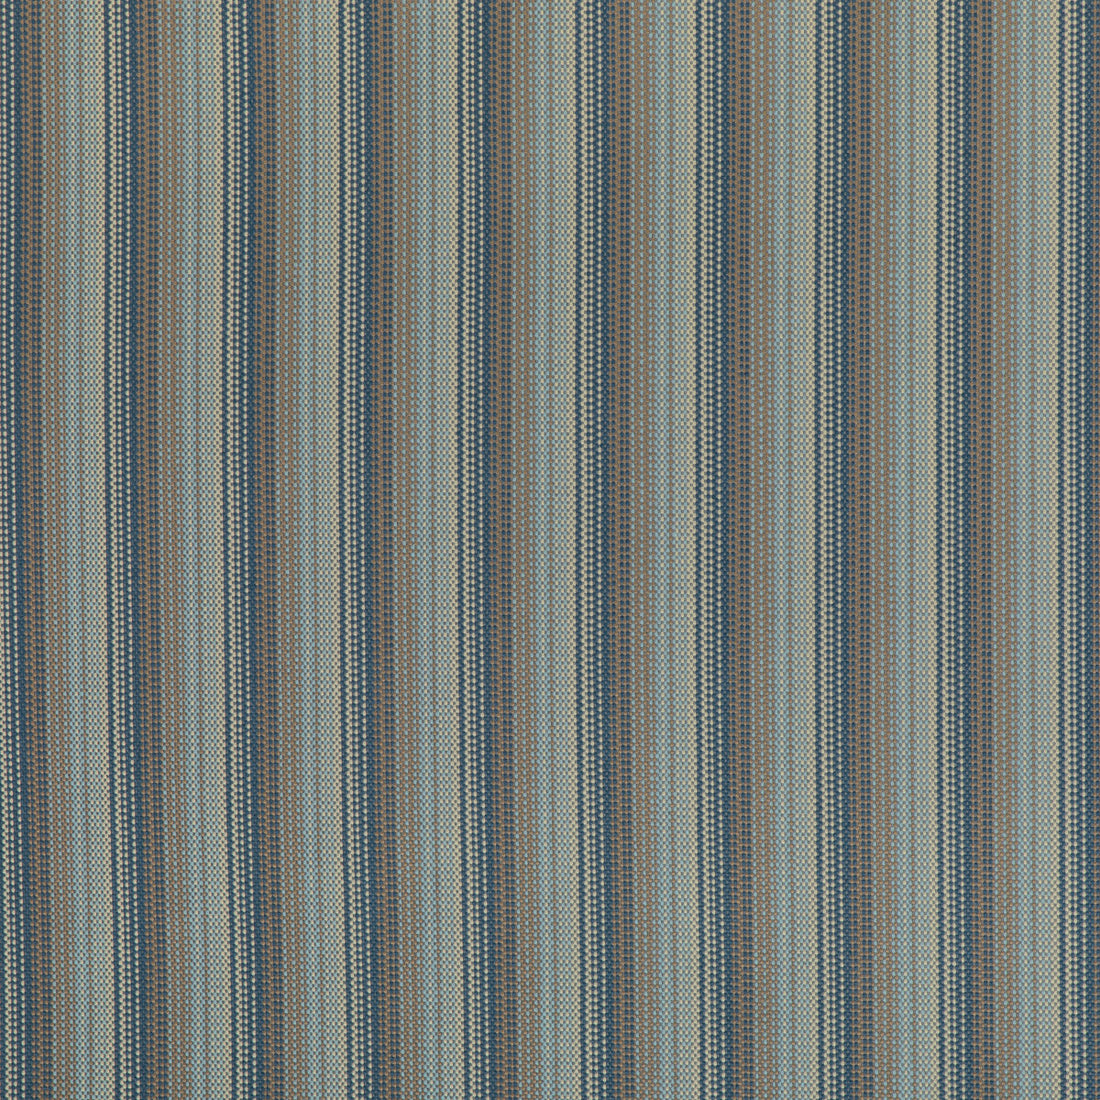 Baystreet fabric in lake color - pattern 37068.514.0 - by Kravet Contract in the Chesapeake collection